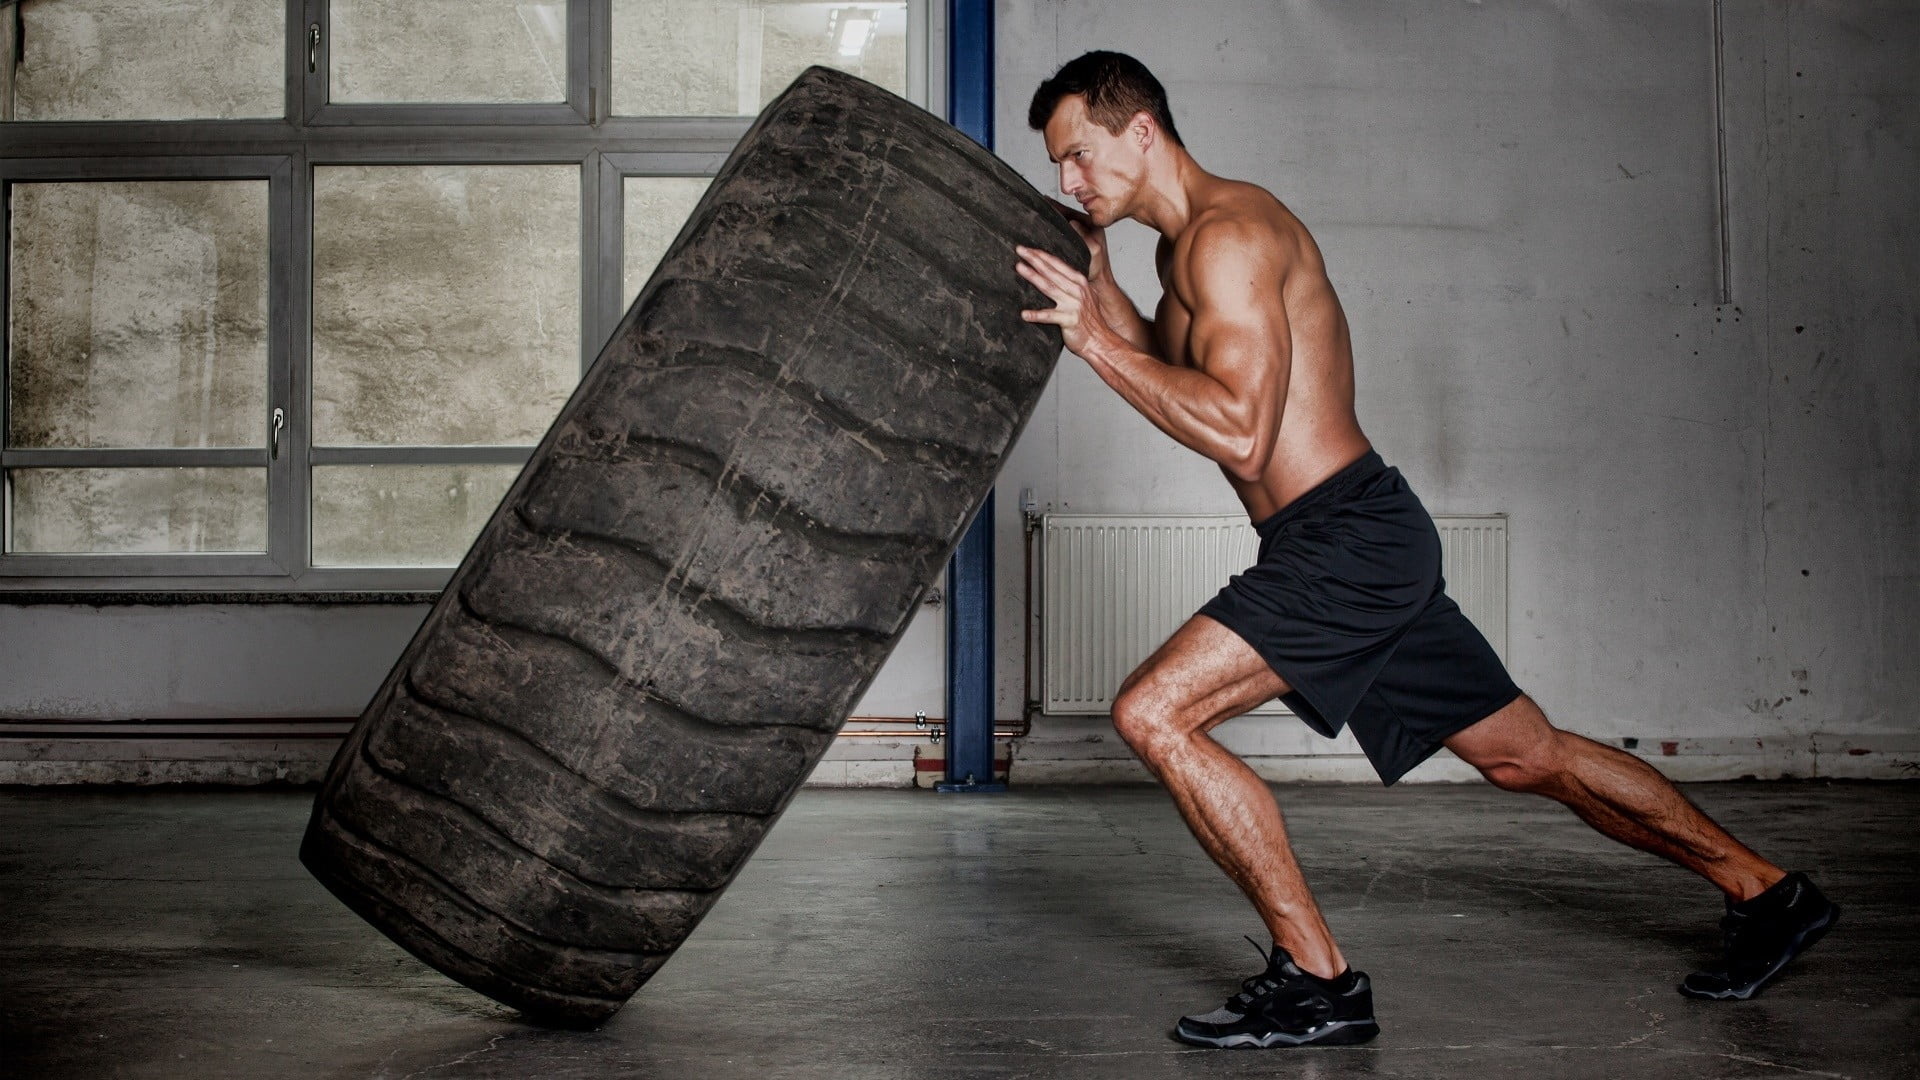 CrossFit: Tire workout, Resistance training, Strength training, 200-pound tire flips, Muscle-strengthening exercise. 1920x1080 Full HD Wallpaper.